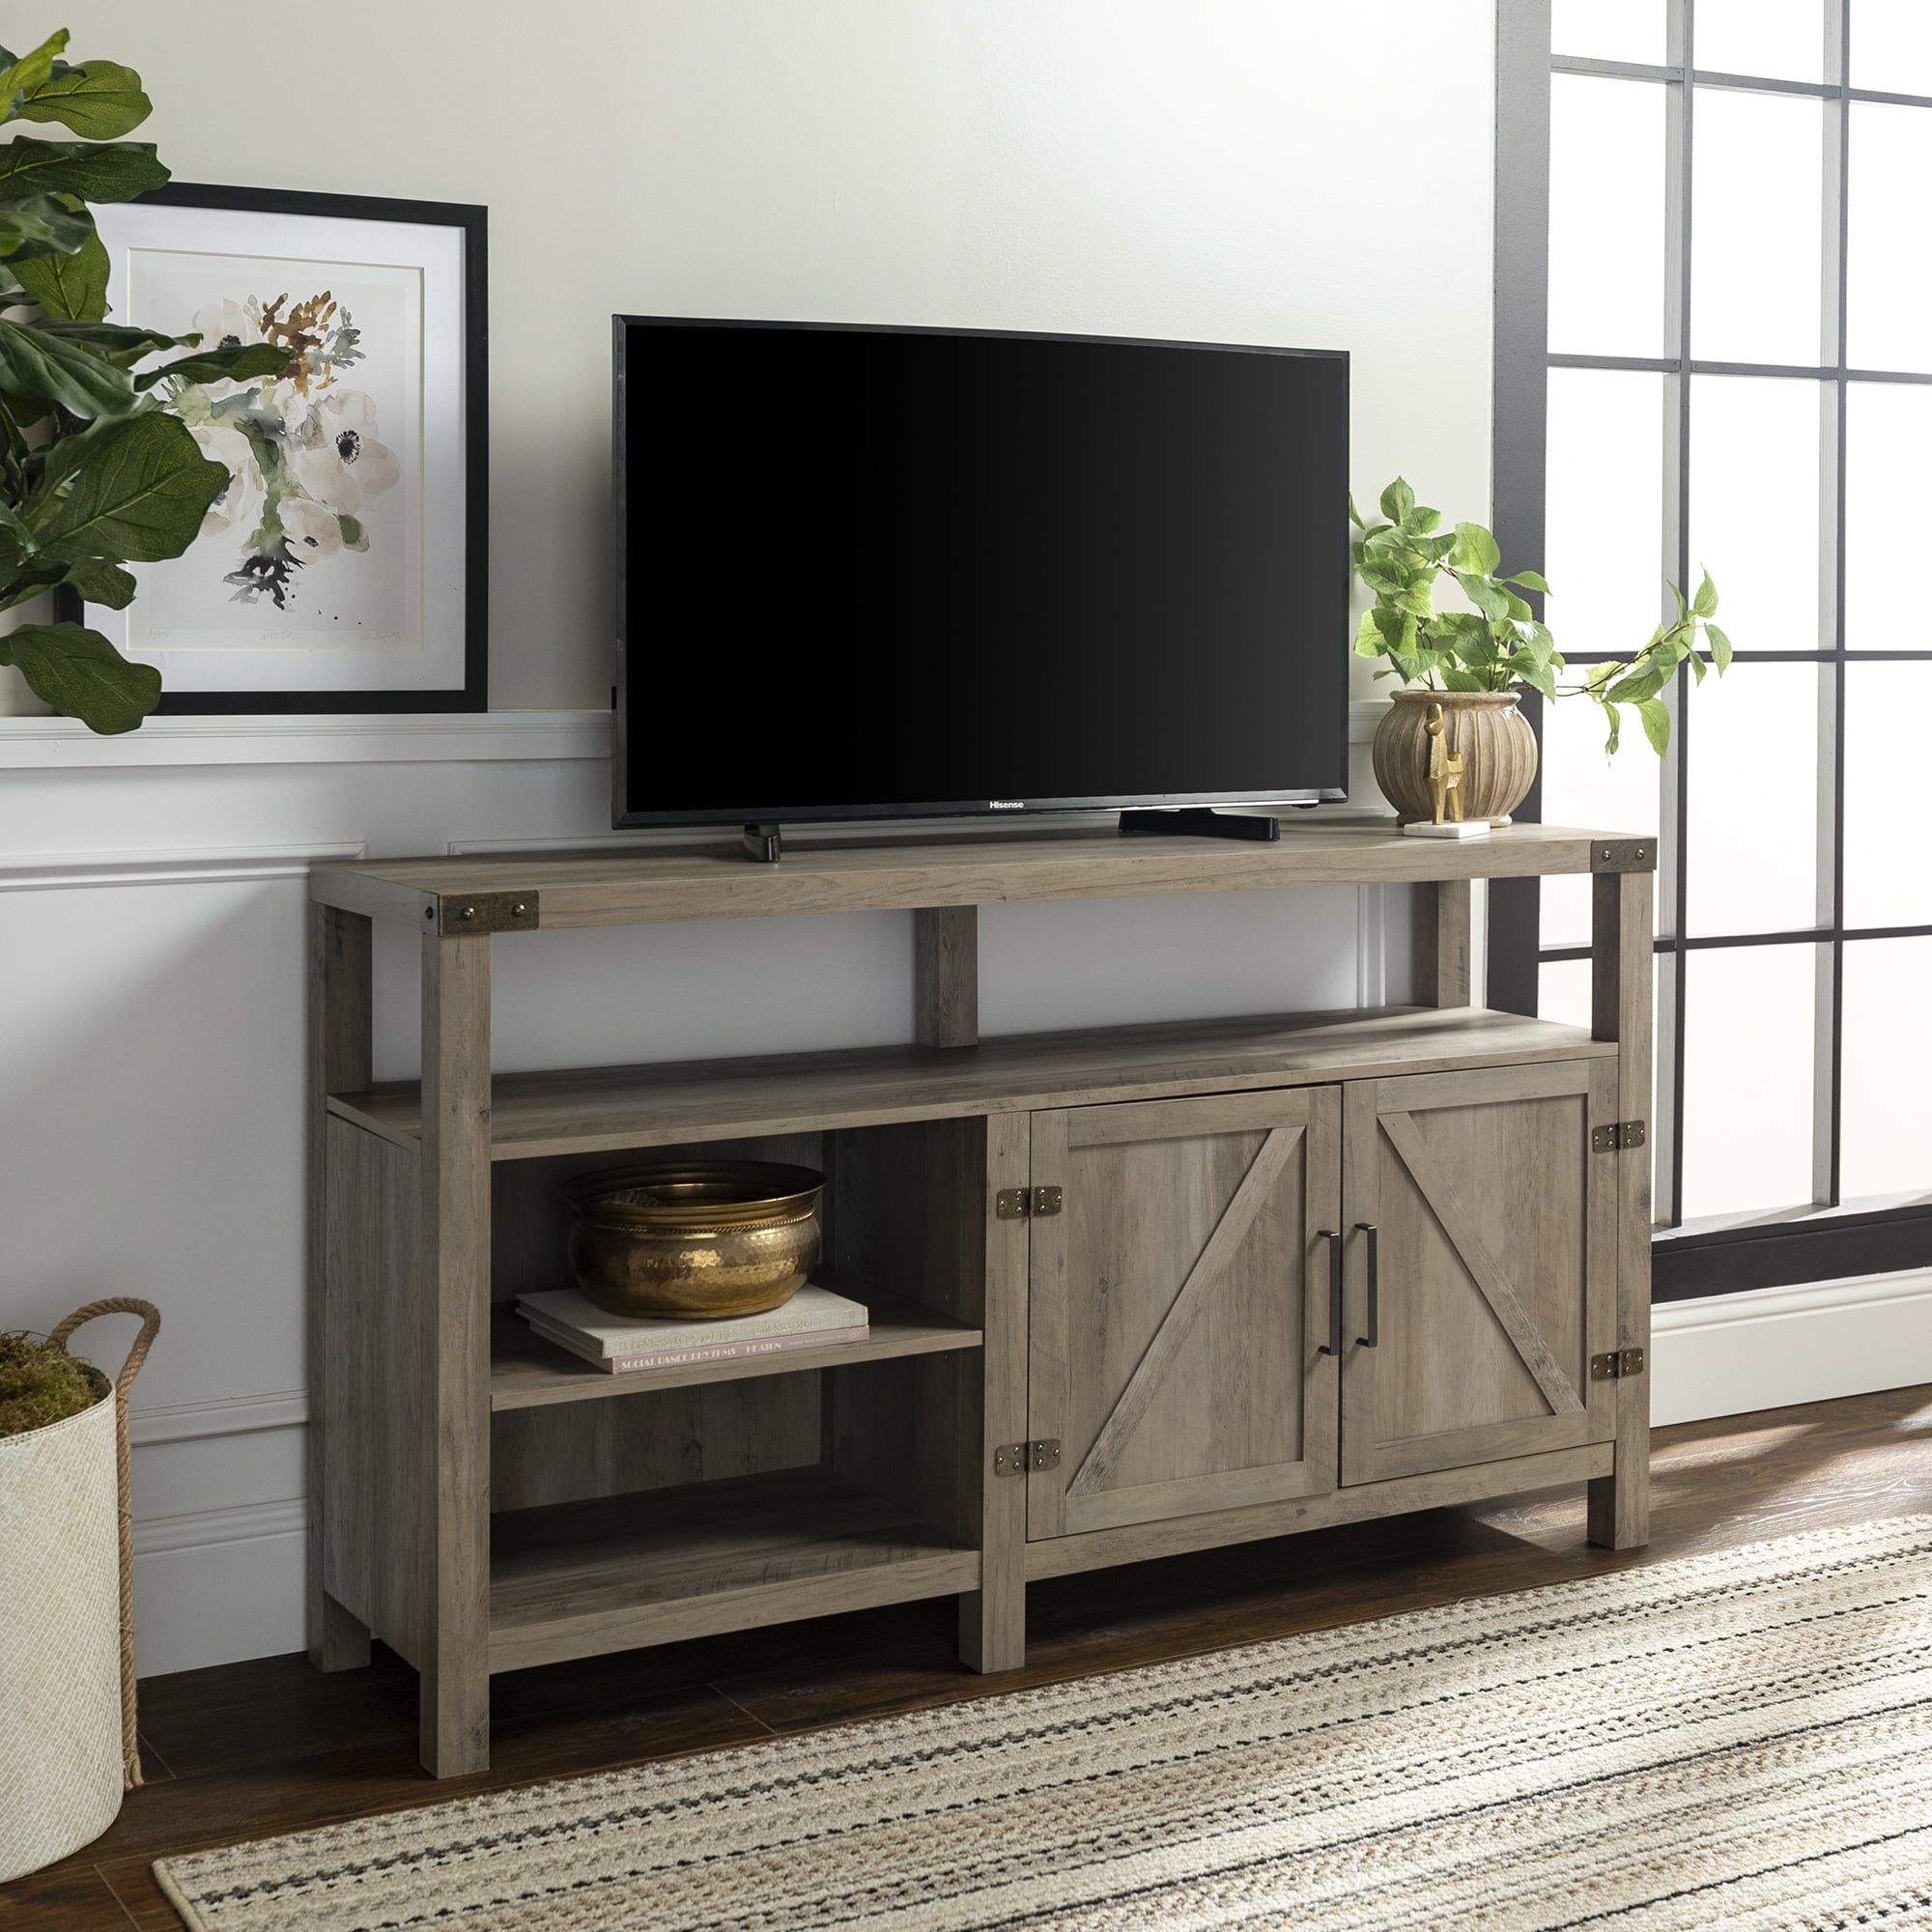 Manor Park Modern Farmhouse Tall Barn Door Tv Stand For Tv's Up To 64 Intended For Farmhouse Tv Stands (Gallery 1 of 20)